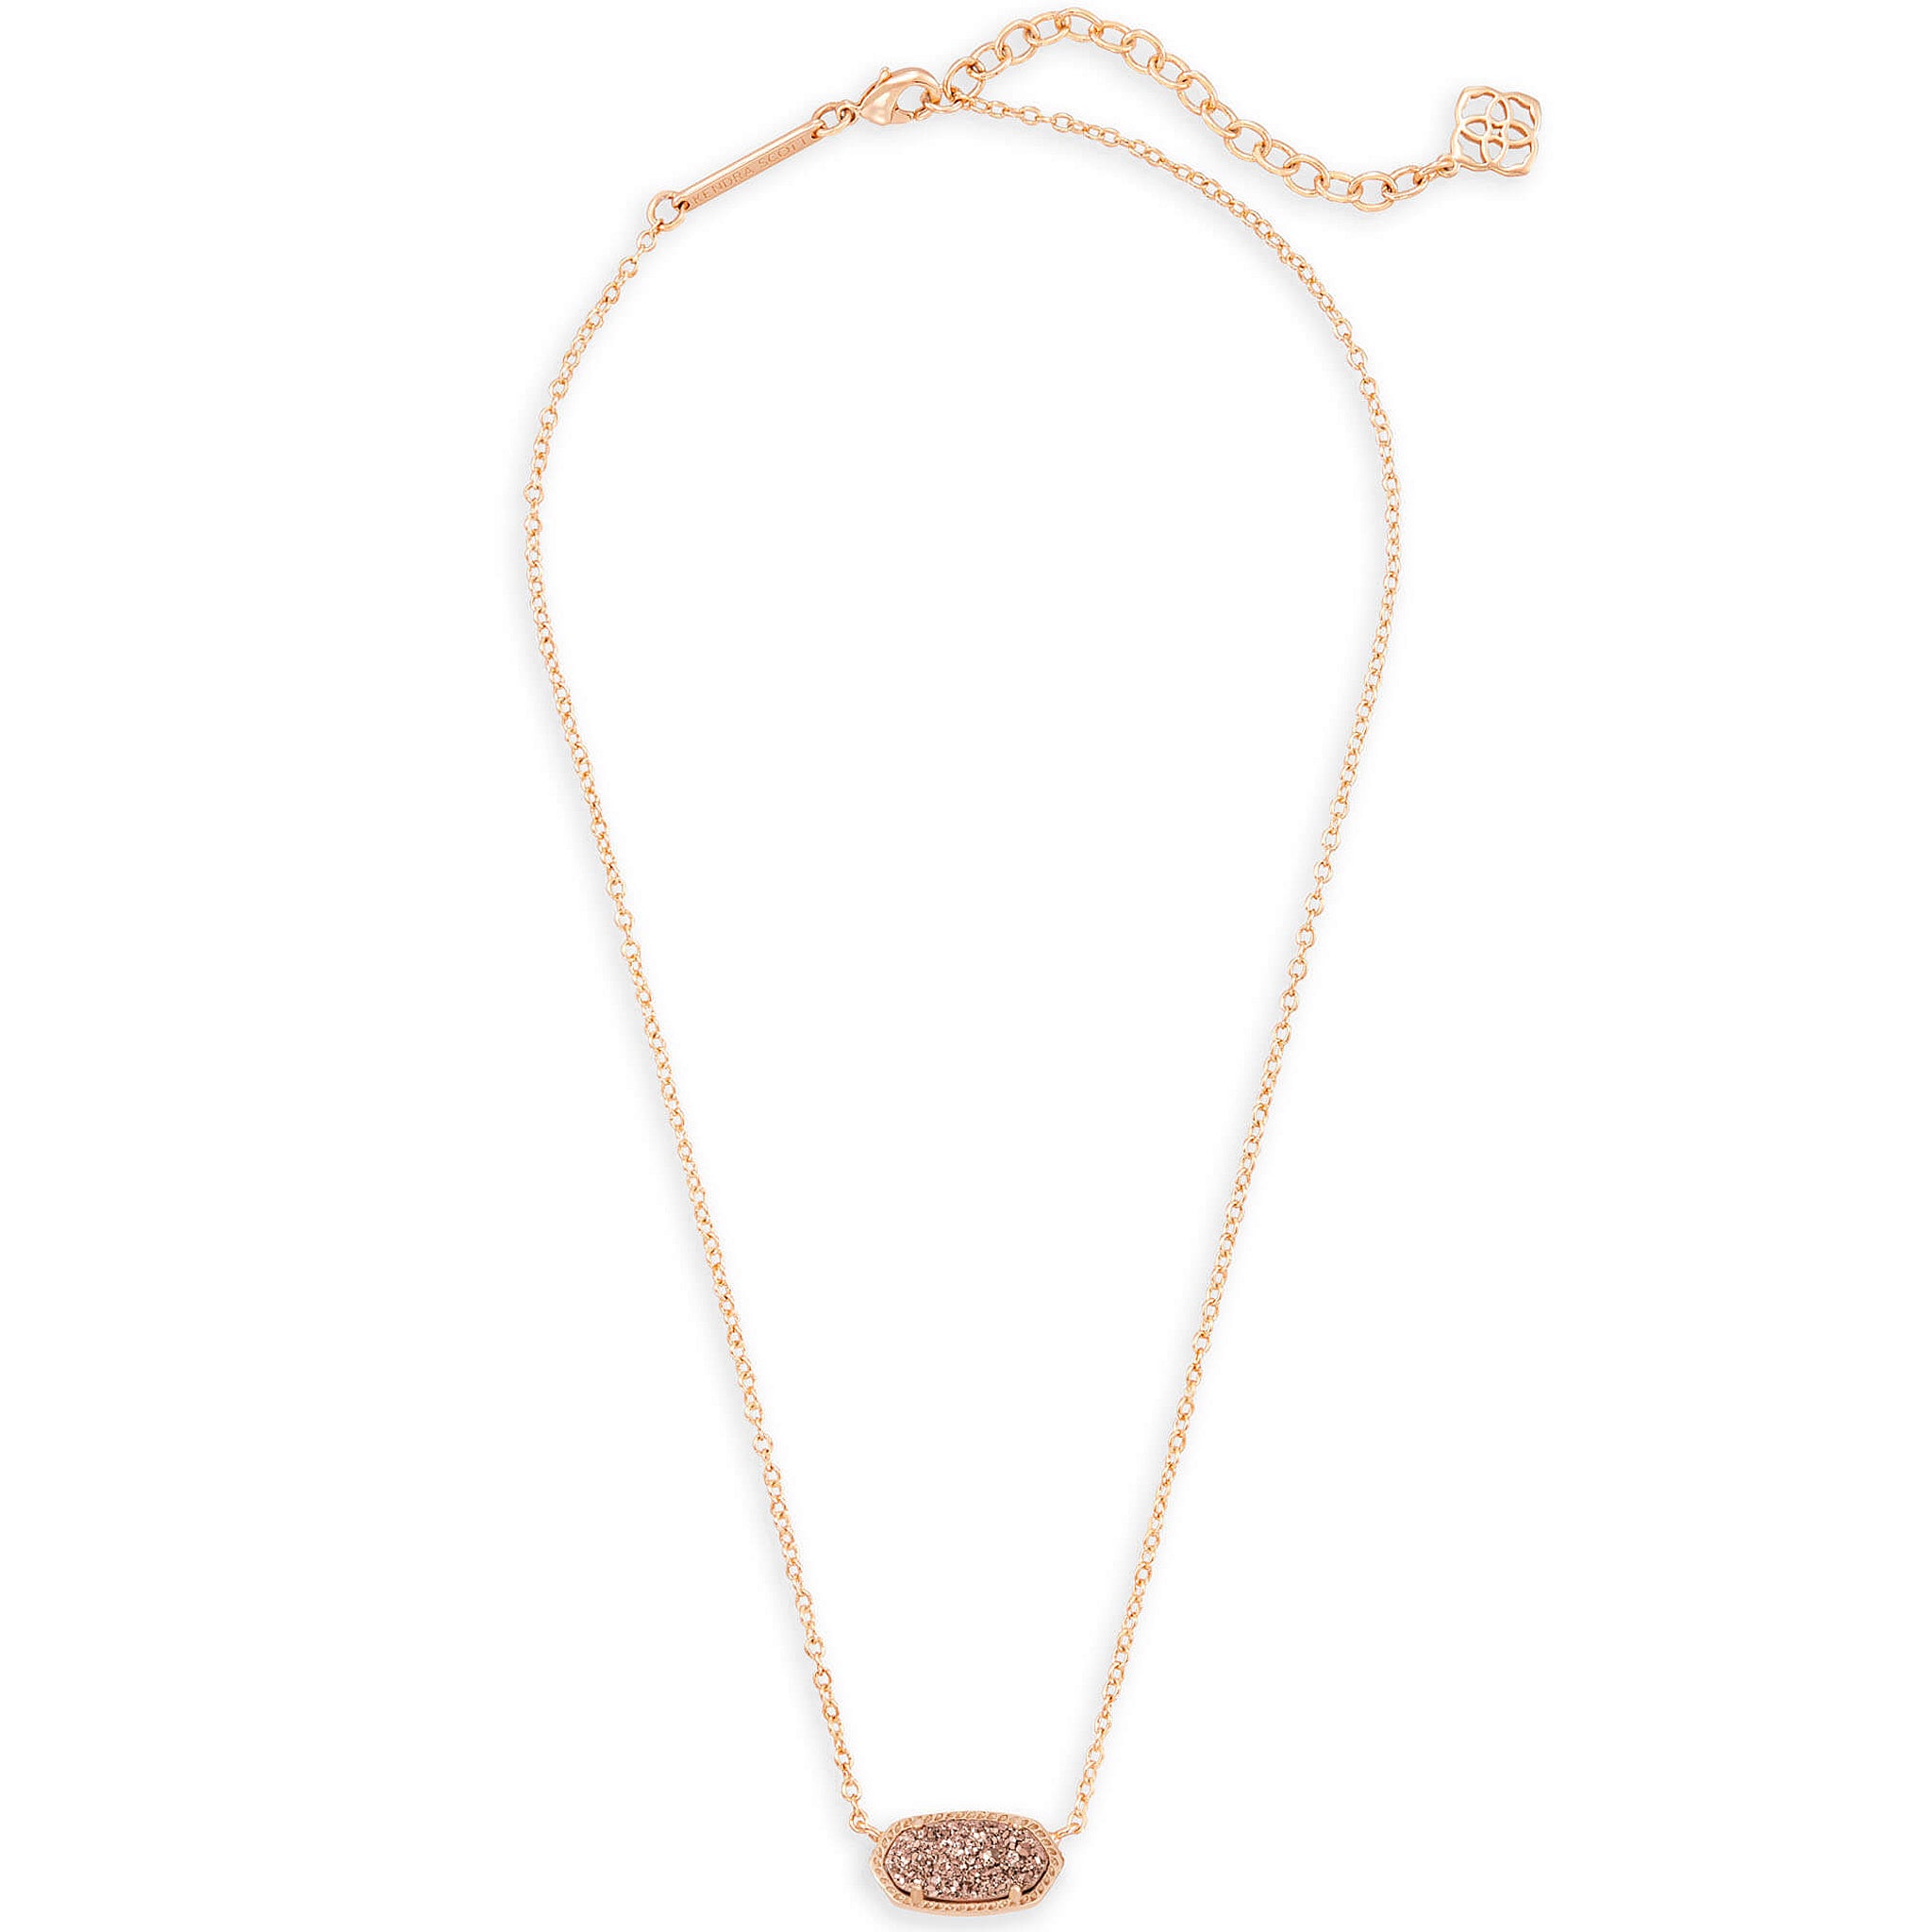 Kendra Scott Elisa Oval Pendant Necklace in Rose Gold Drusy and Rose Gold